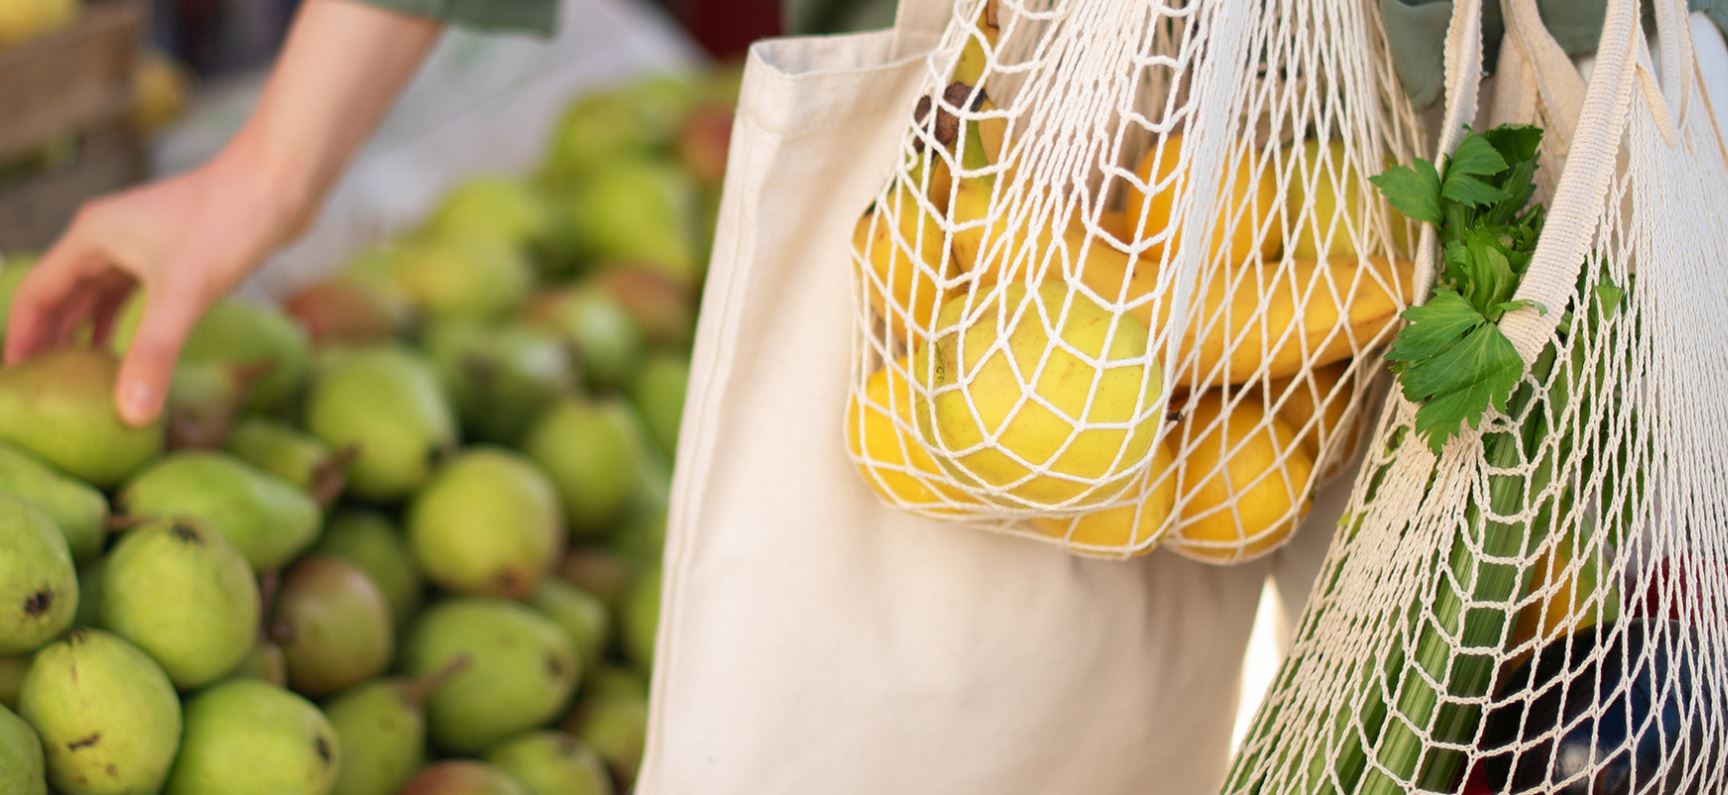 Reusable Totes Can Carry Health Risks With Groceries